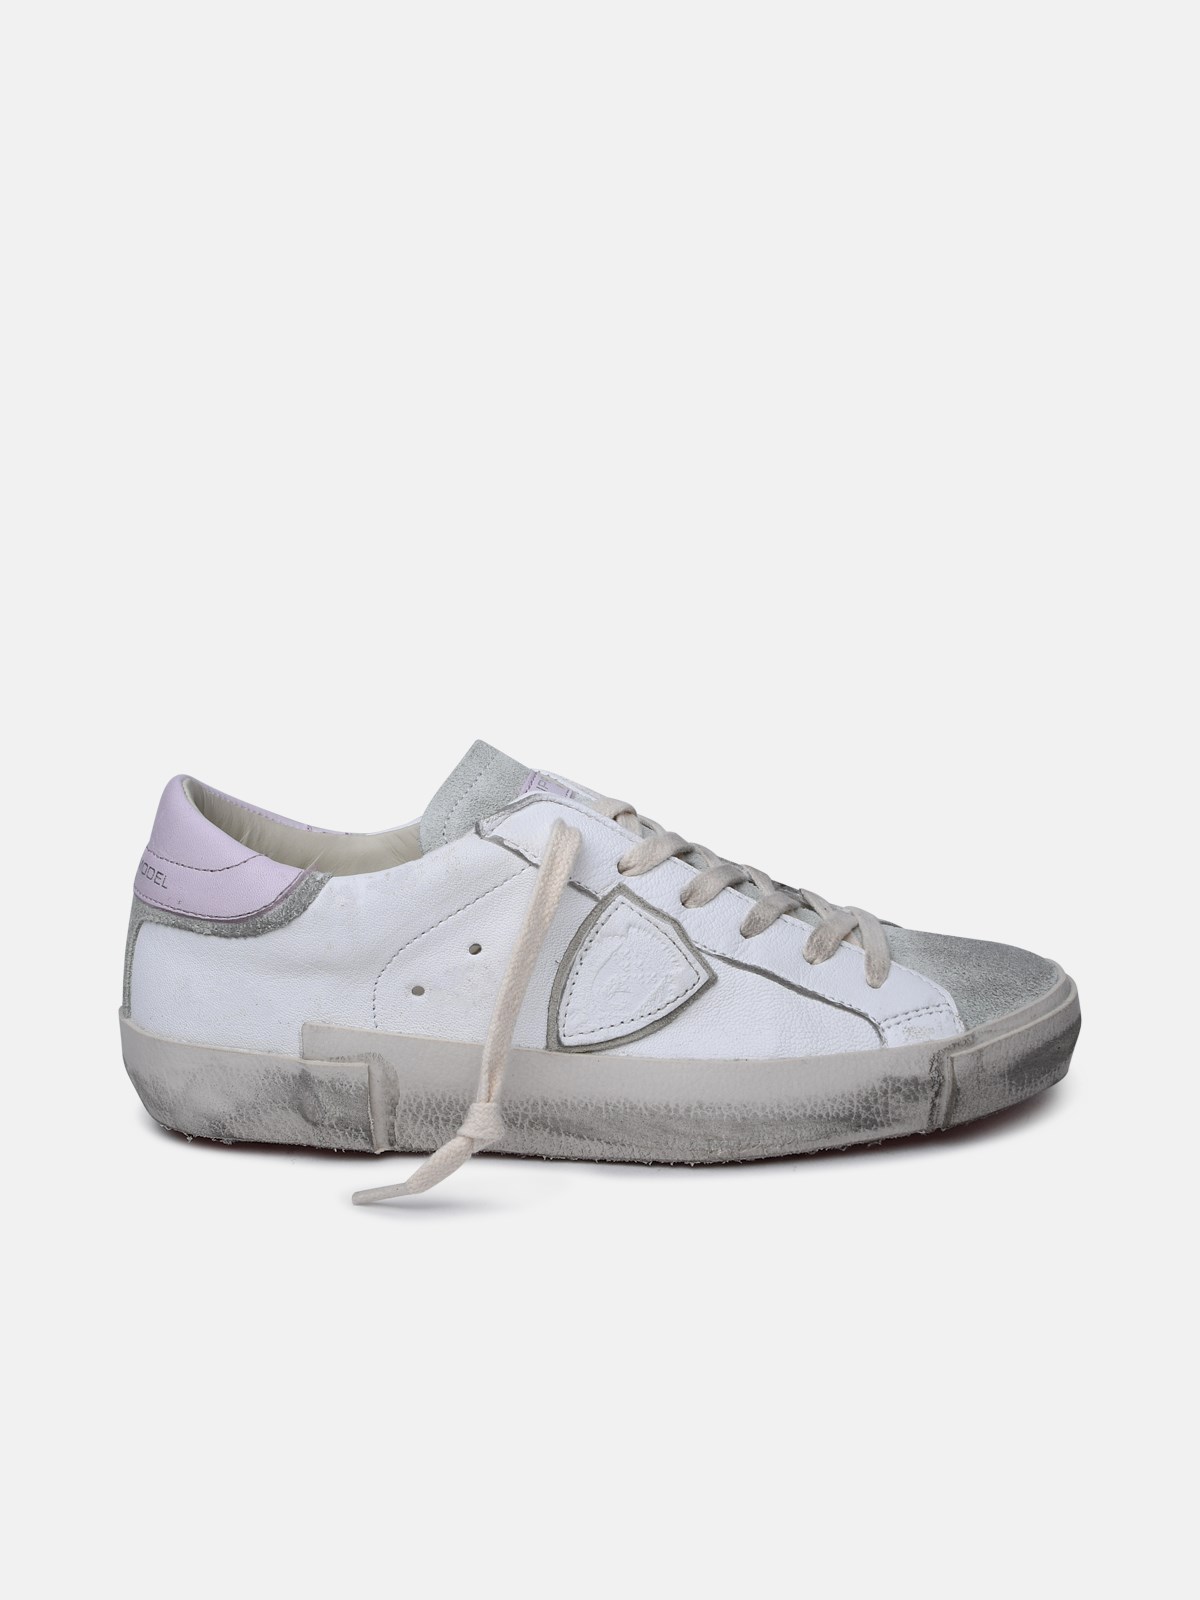 Philippe Model Multicolor Leather Sneakers In White